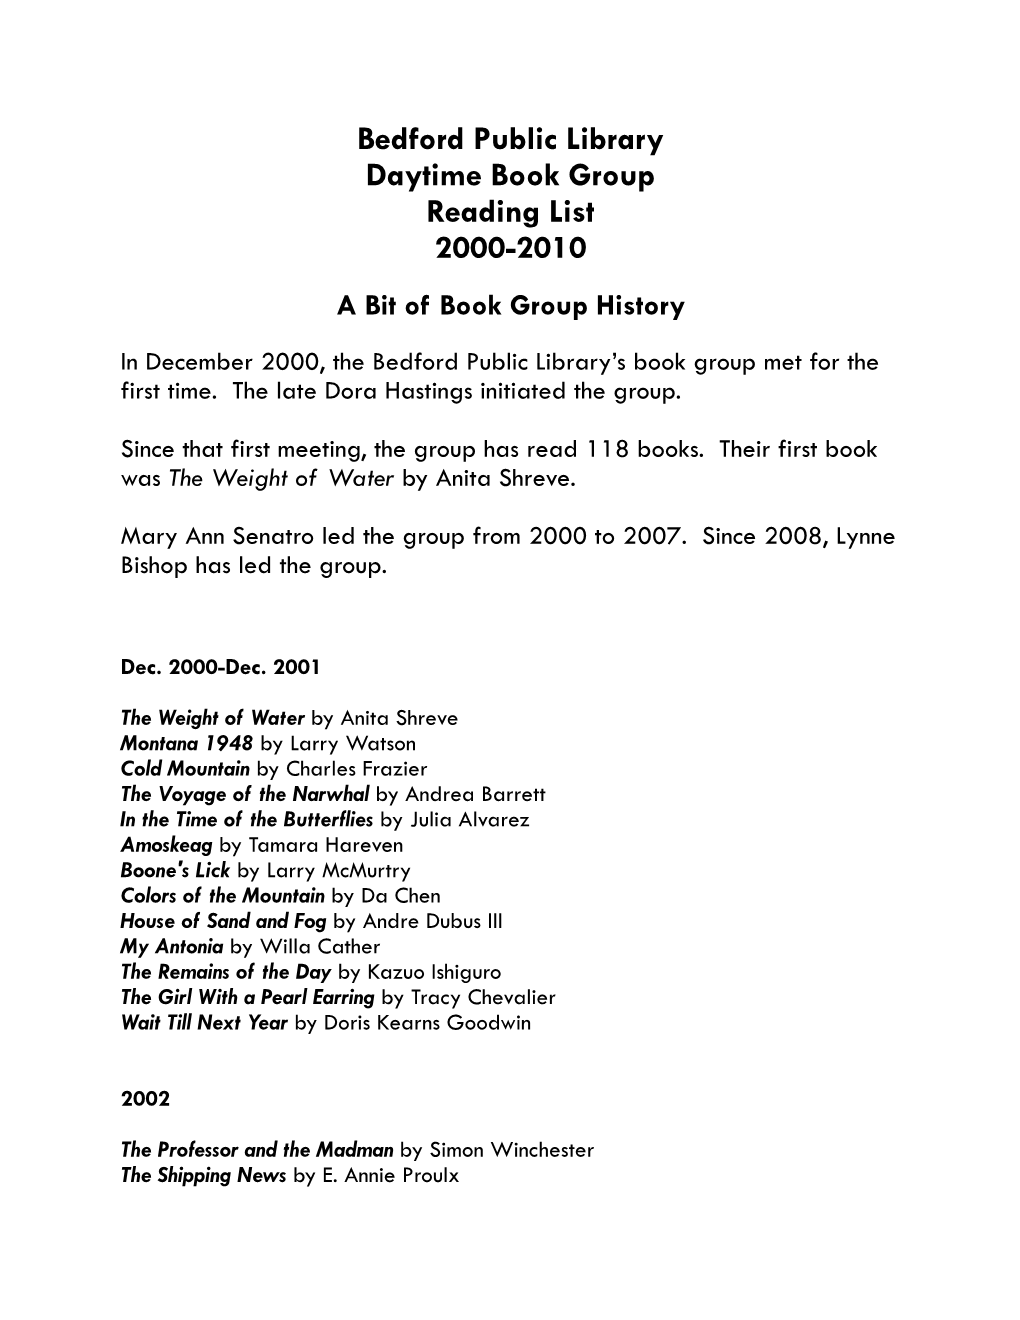 Daytime Book Group Selections 2000-2010